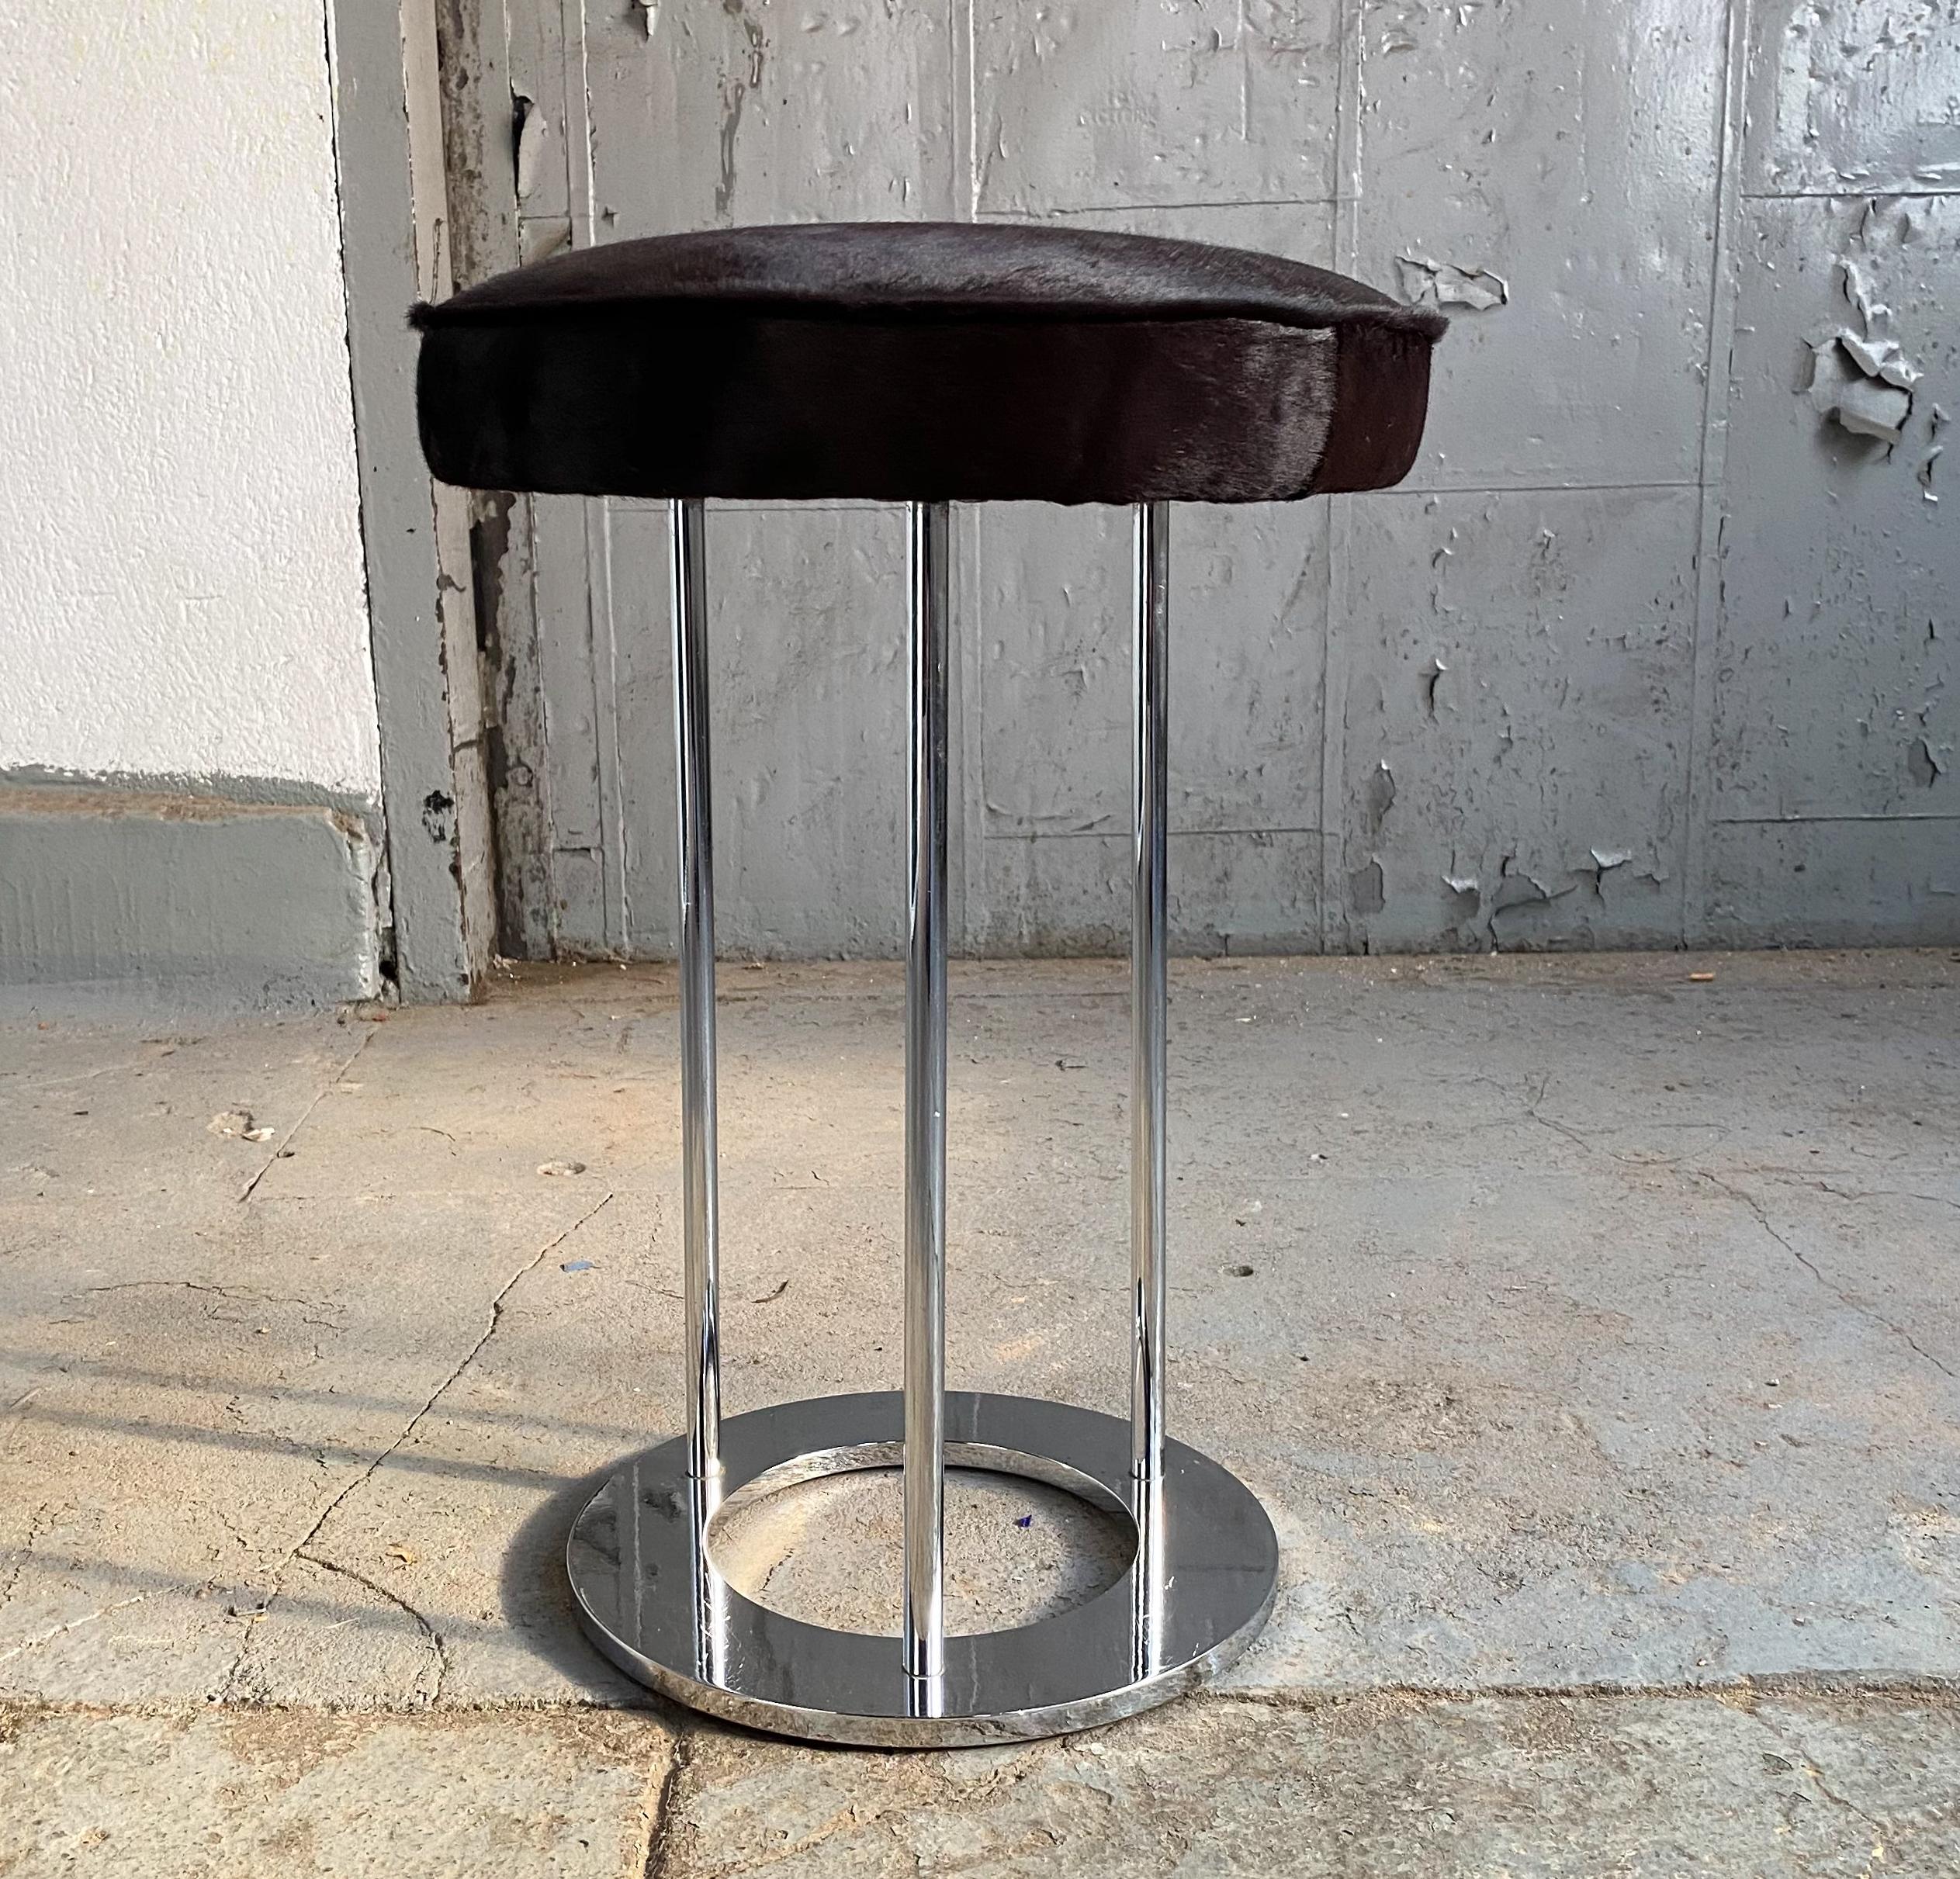 Stool with polished chrome risers and a newly upholstered seat in animal hide. Designed by Paul Mayen and produced by his company, Habitat, circa 1960s. A seldom seen item from this underrated designer whose Minimalist lighting and furnishings